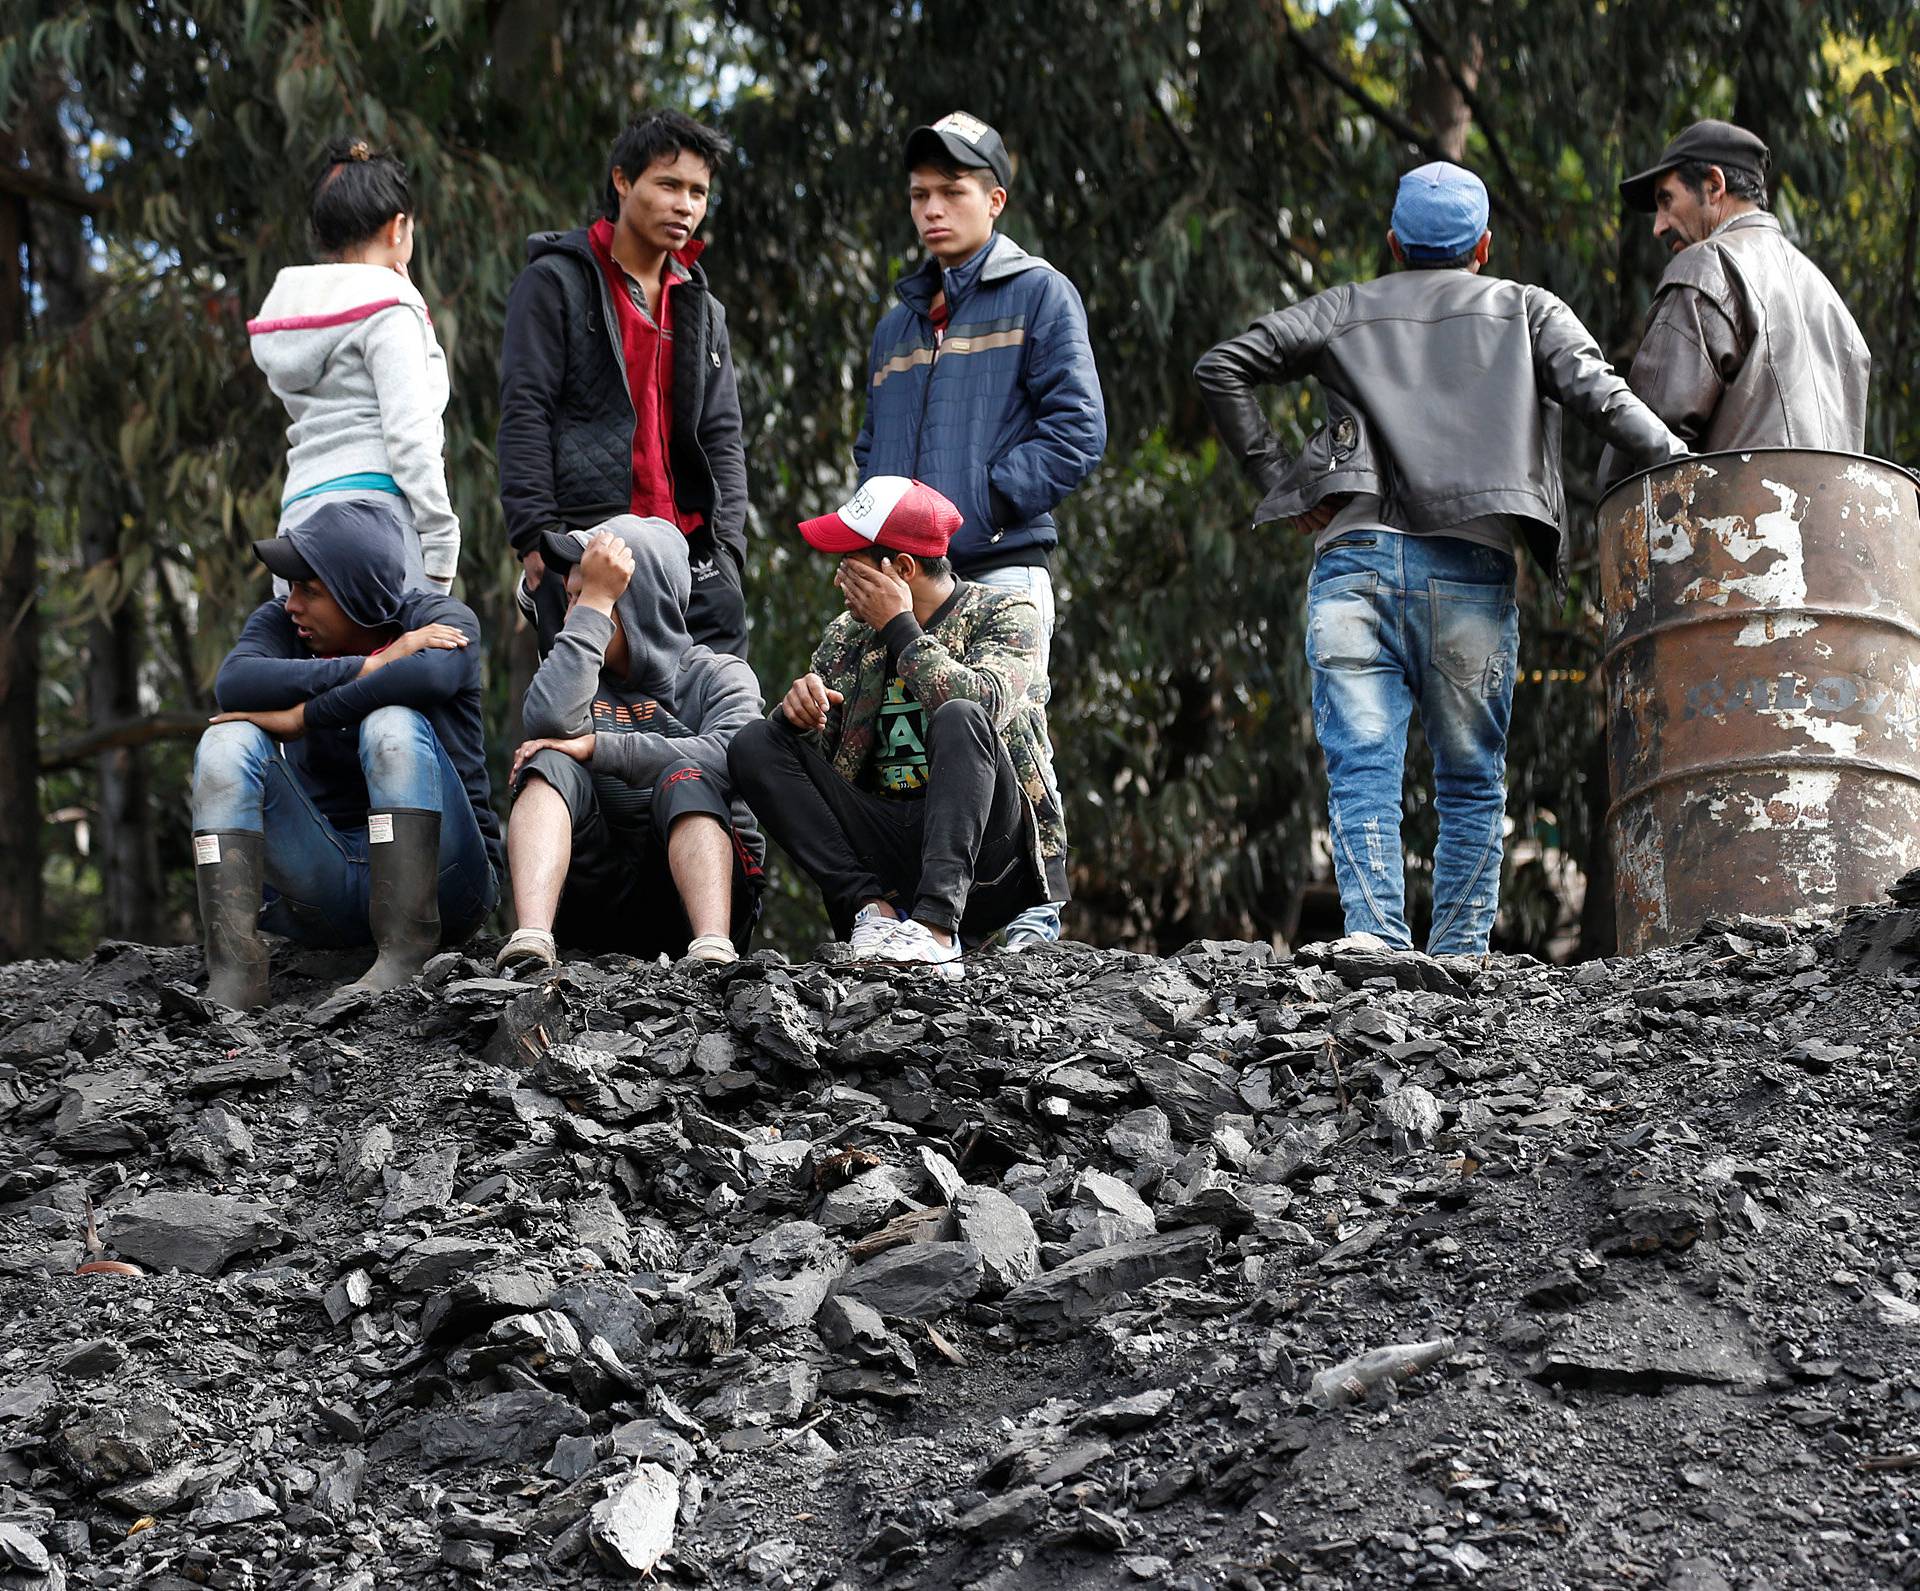 People wait for news of their missing relatives after an explosion at an underground coal mine on Friday, in Cucunuba